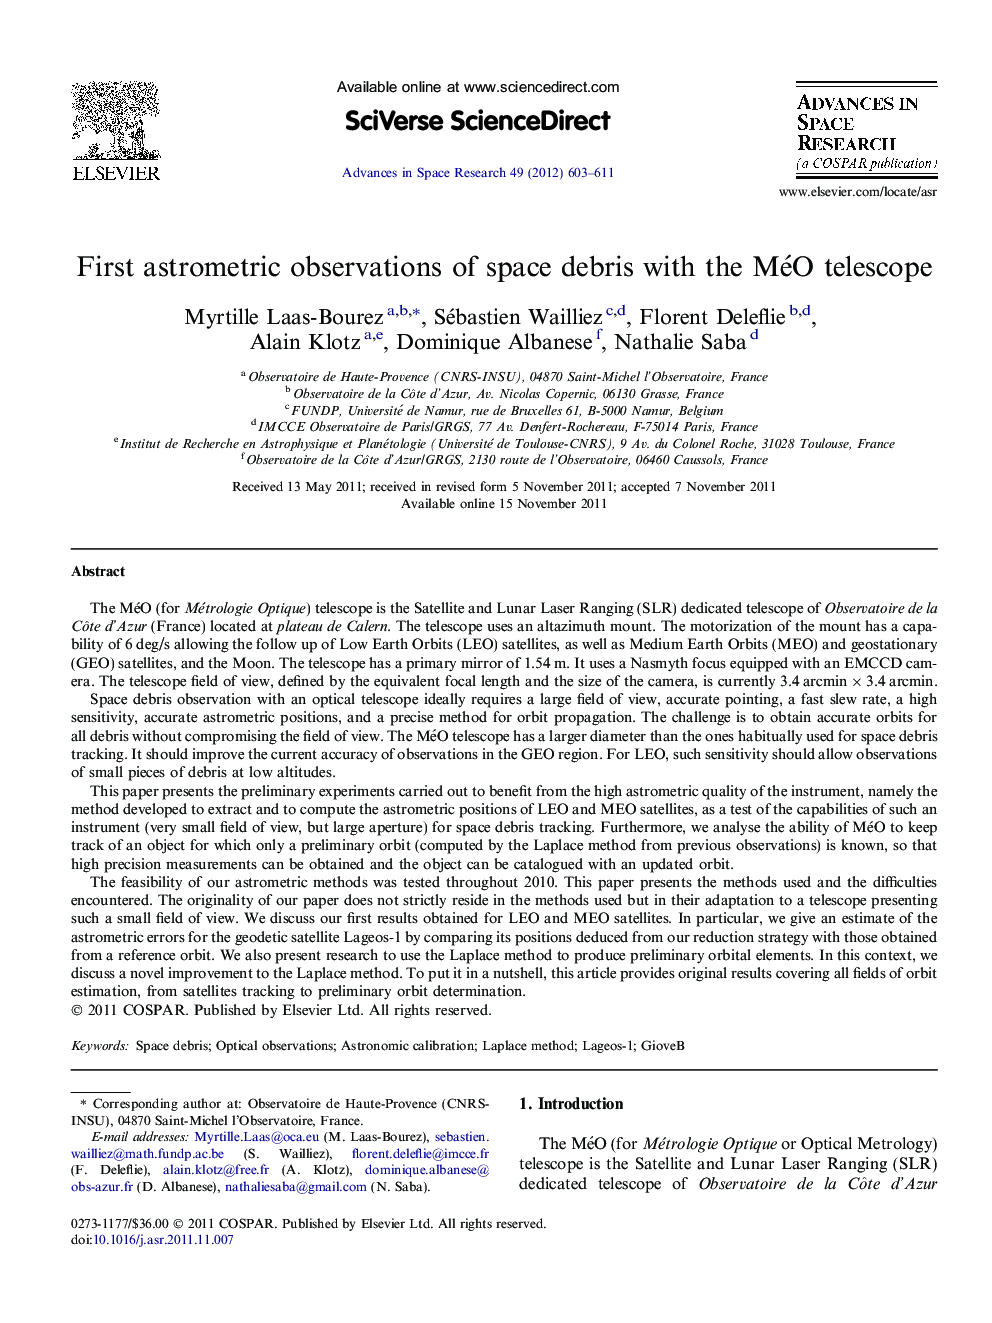 First astrometric observations of space debris with the MéO telescope